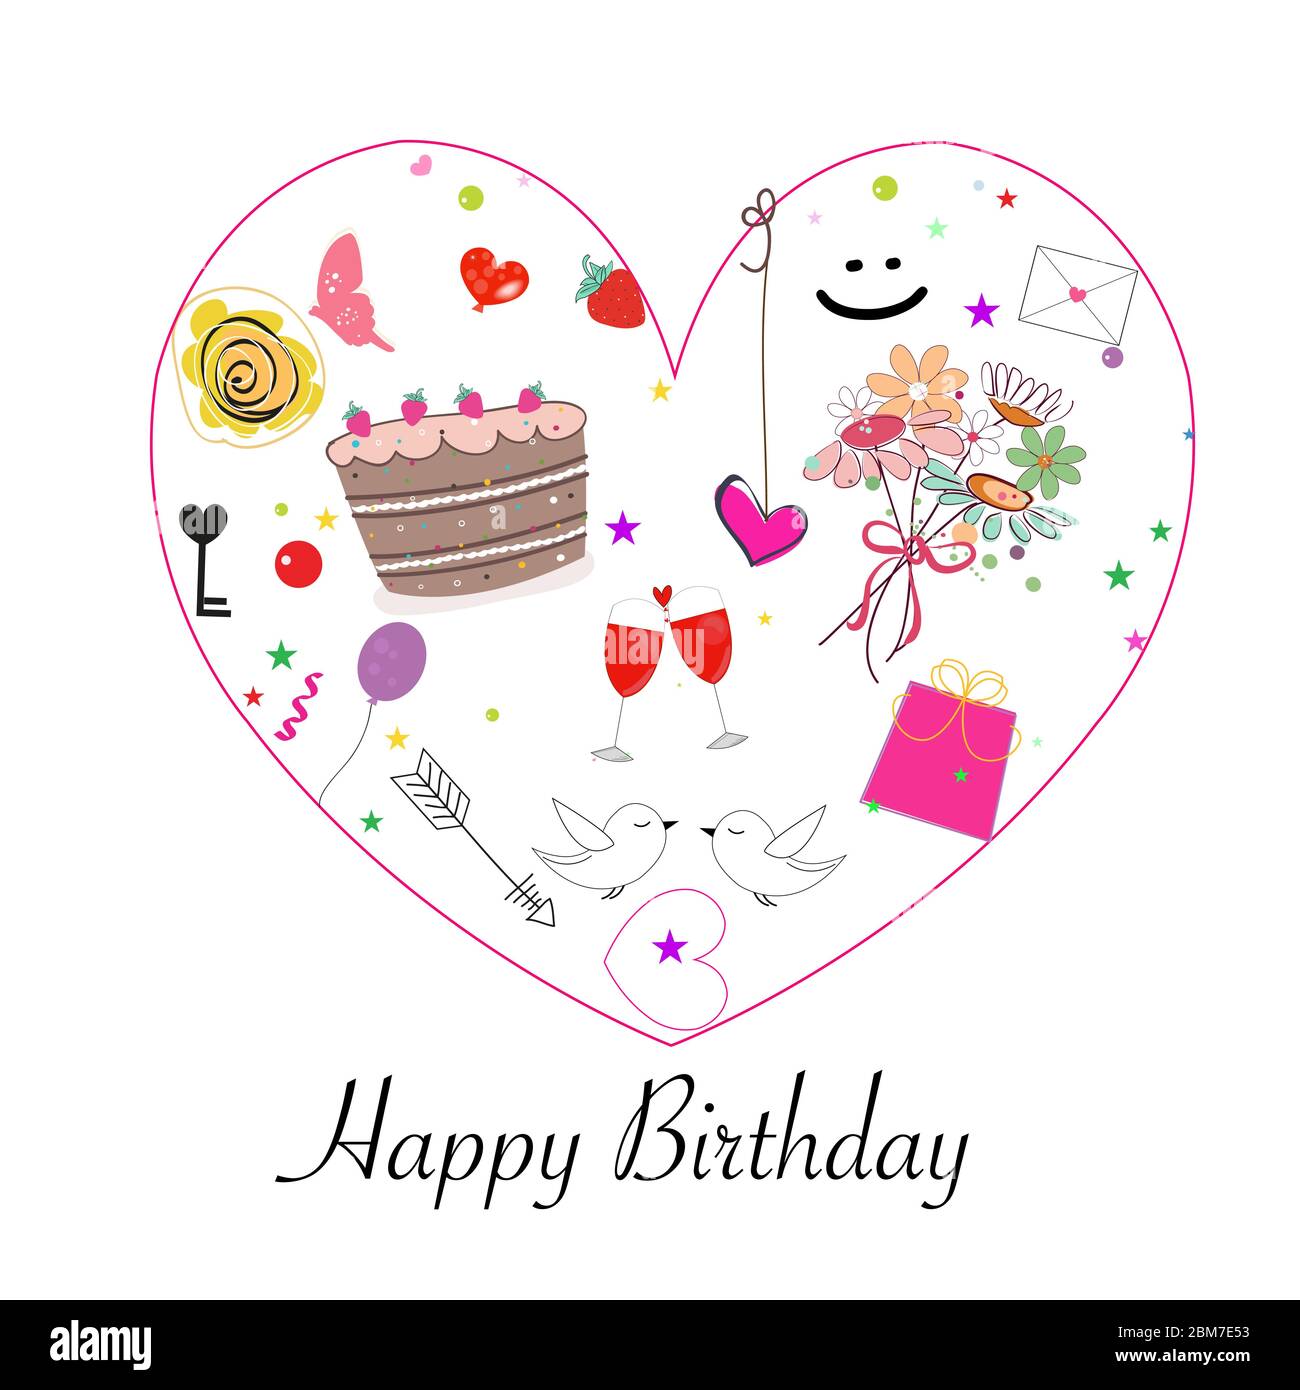 Happy birthday greeting card with cake, flowers, balloon, love ...